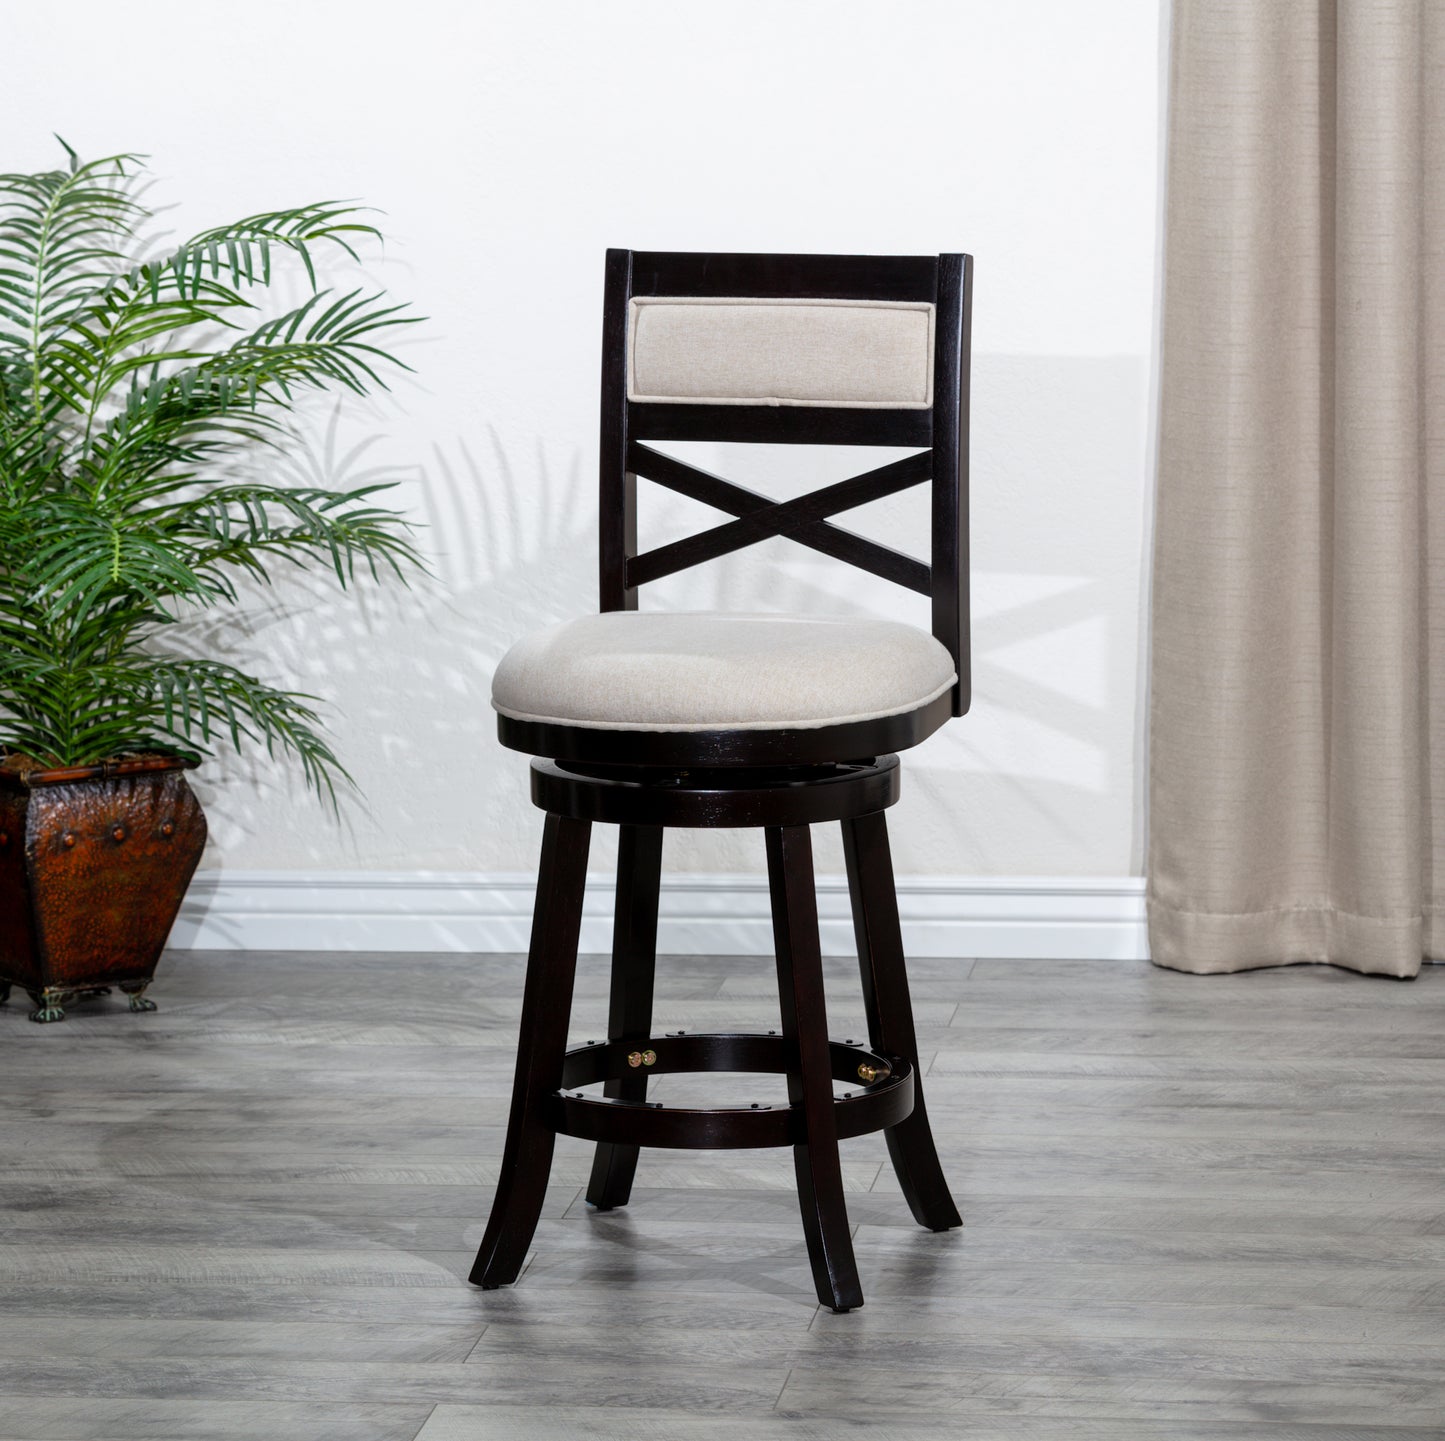 DTY Home 30" Swivel Bar Stool in Espresso with Beige Fabric Seat